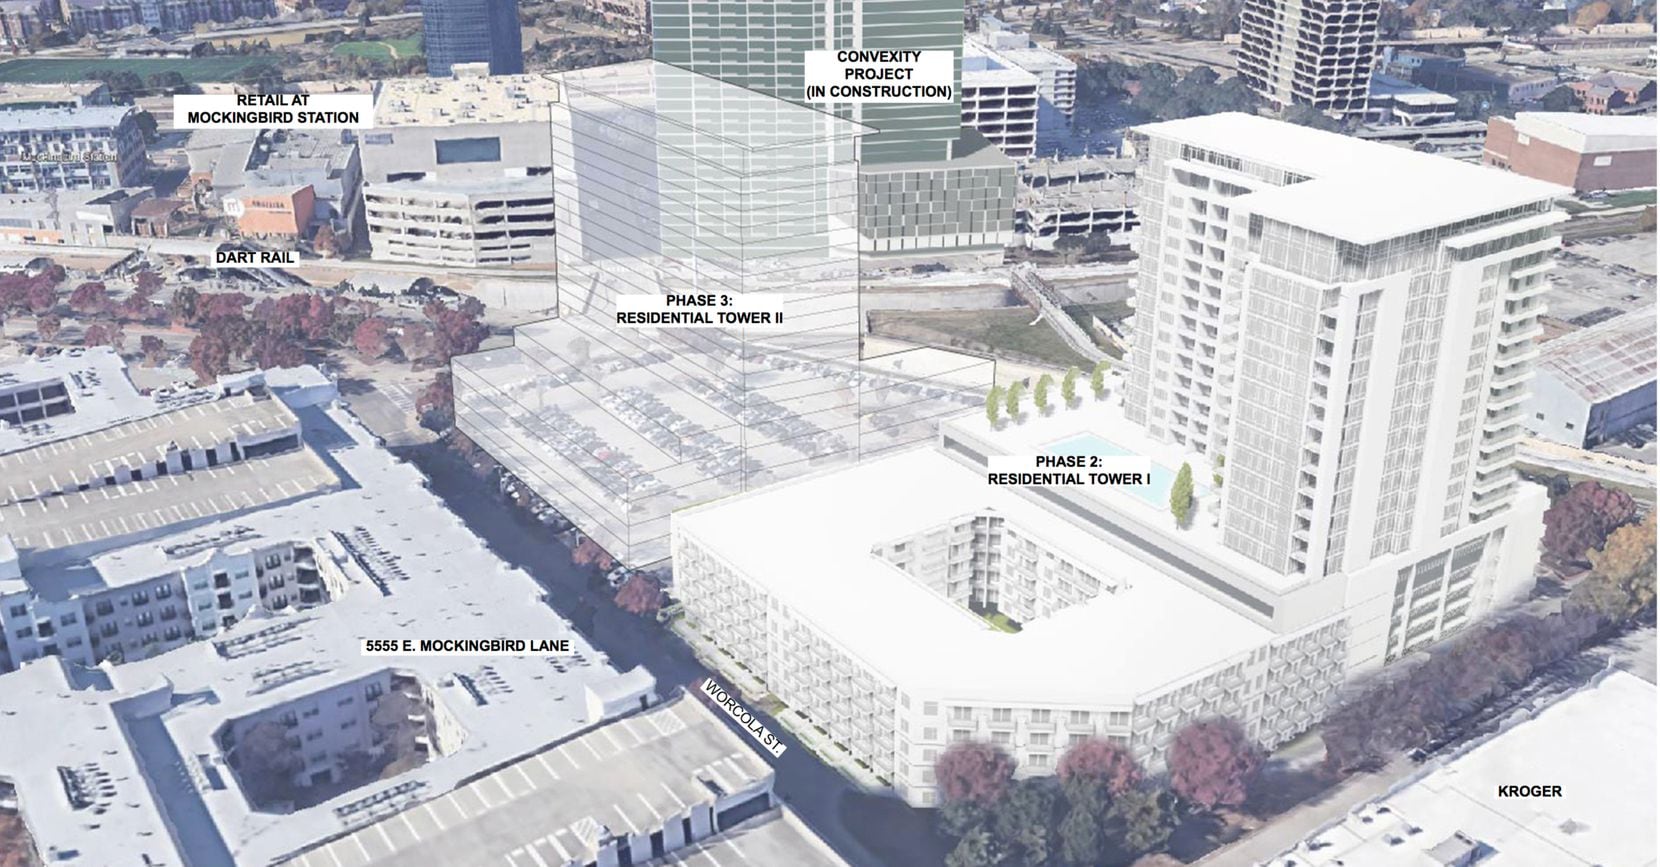 The first apartment tower would be on the east end of the property next to the Kroger...